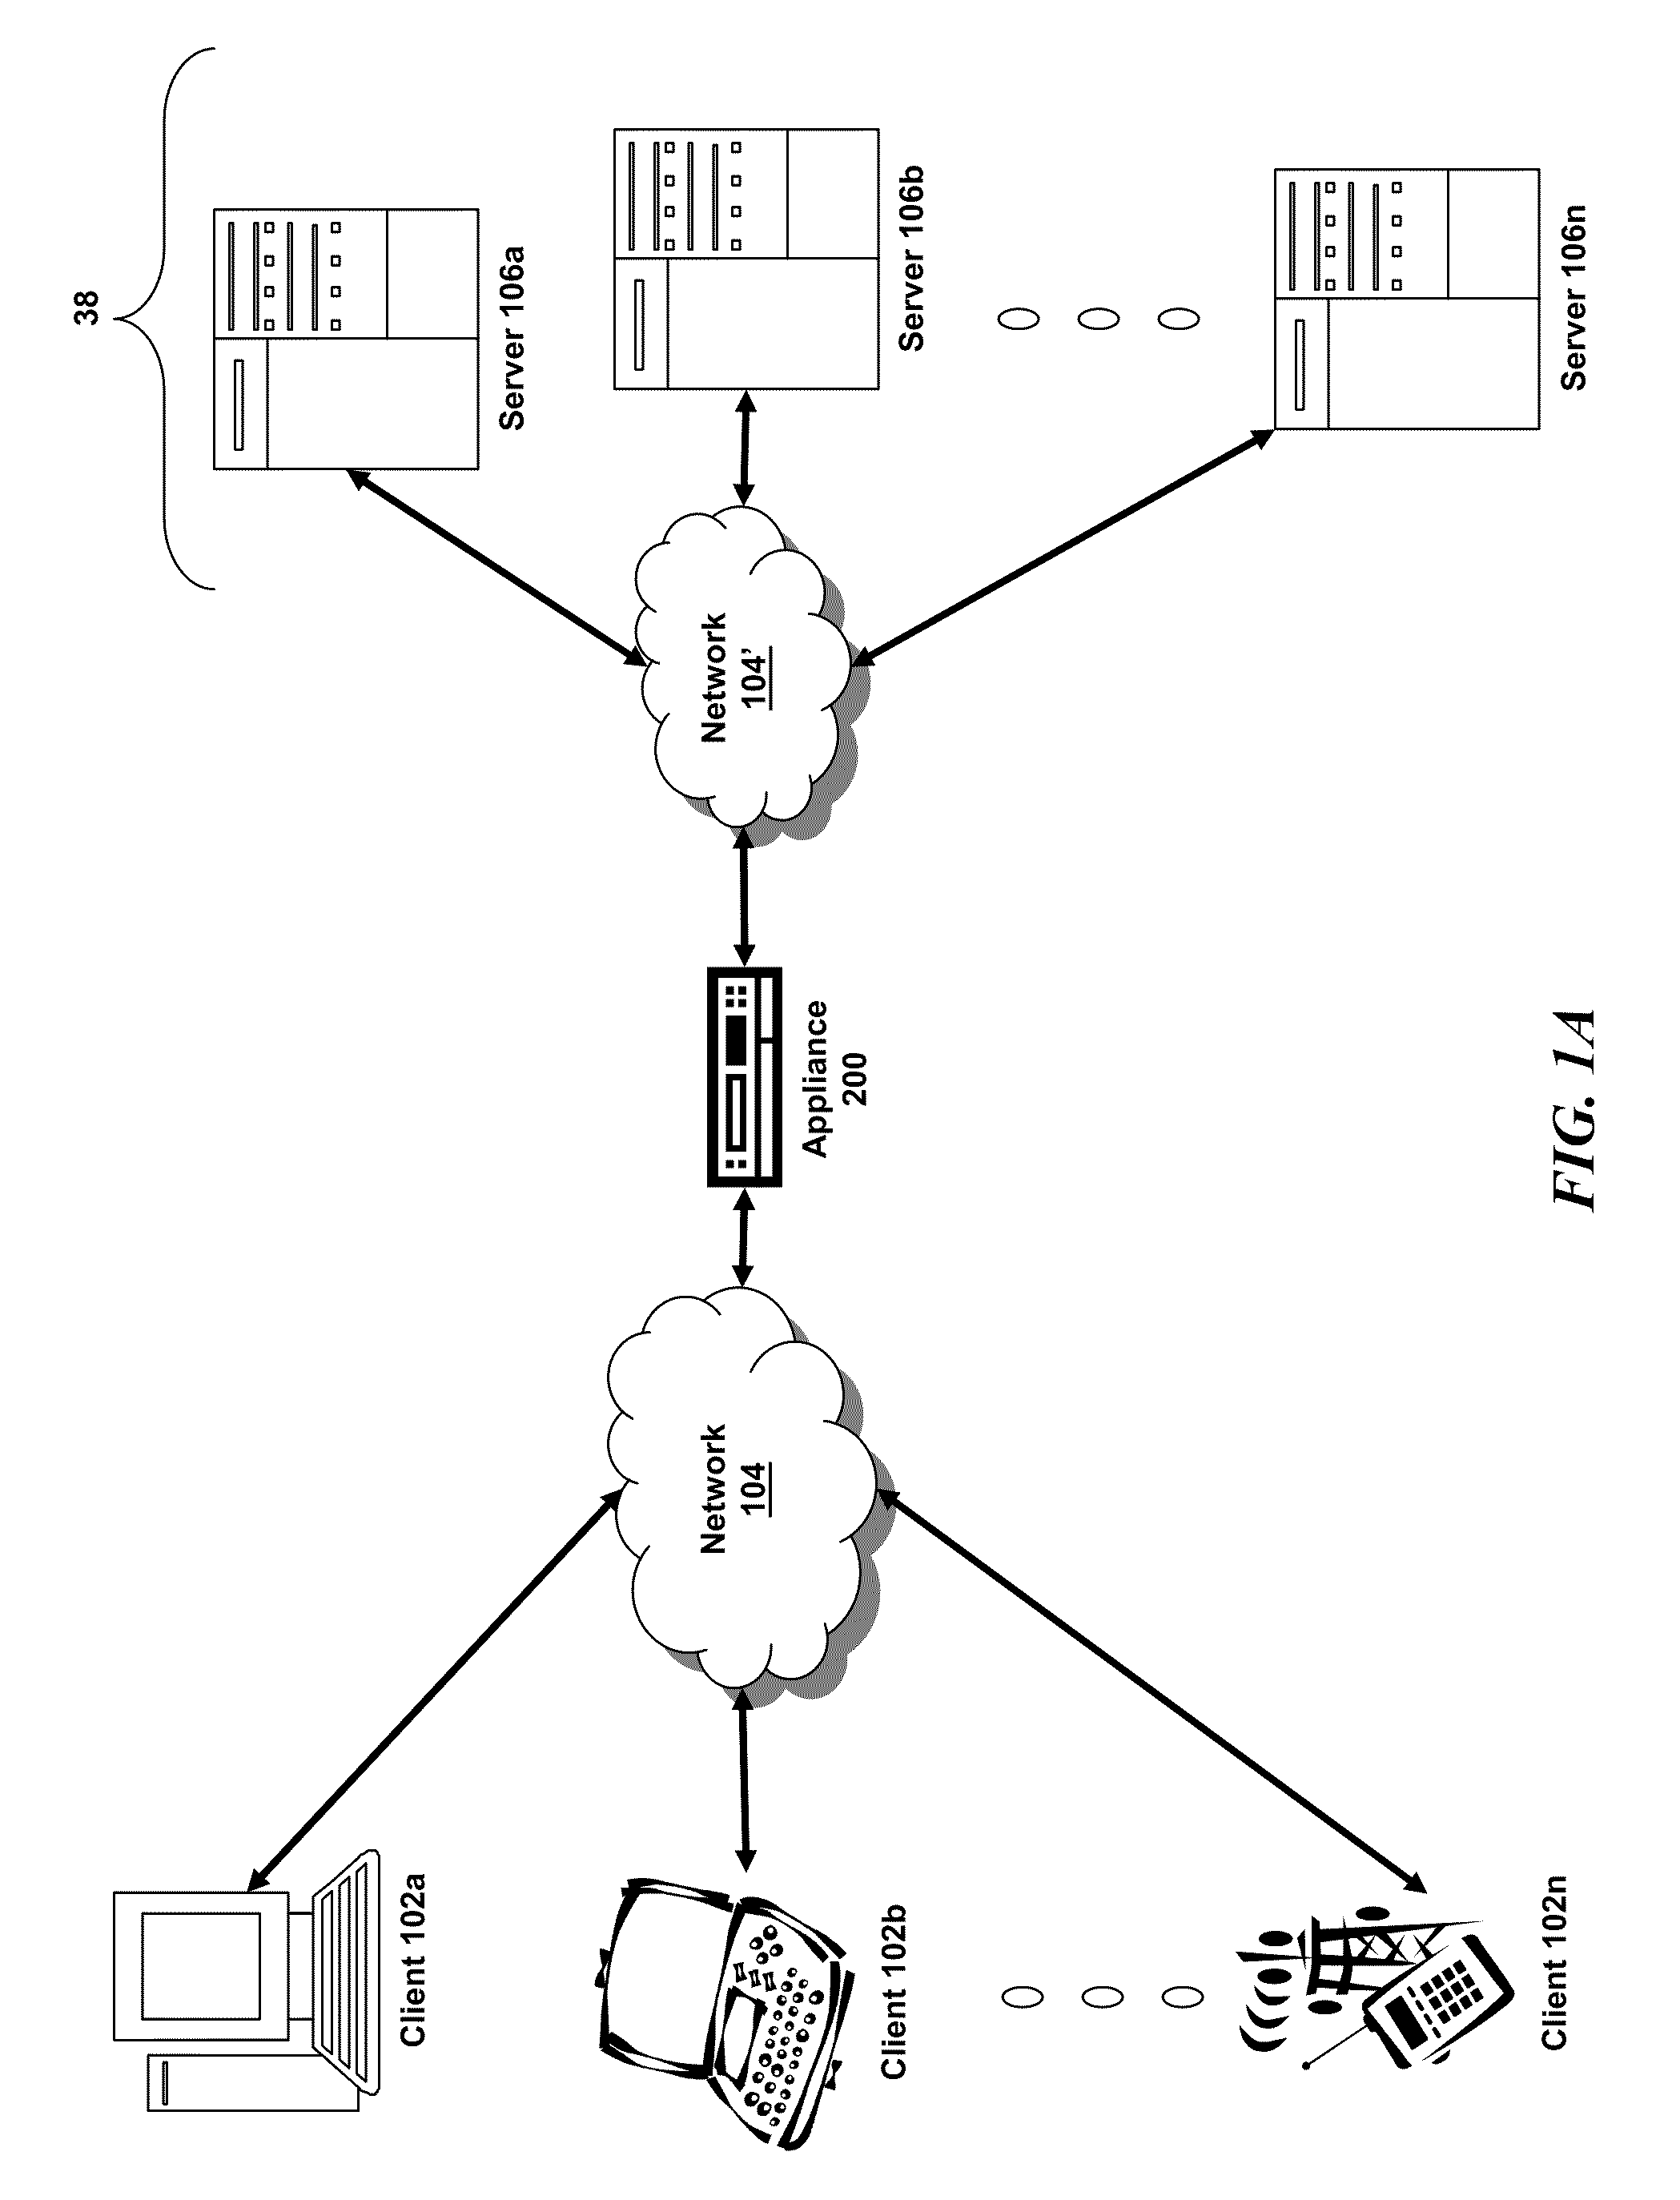 Systems and methods for managing ports for rtsp across cores in a multi-core system